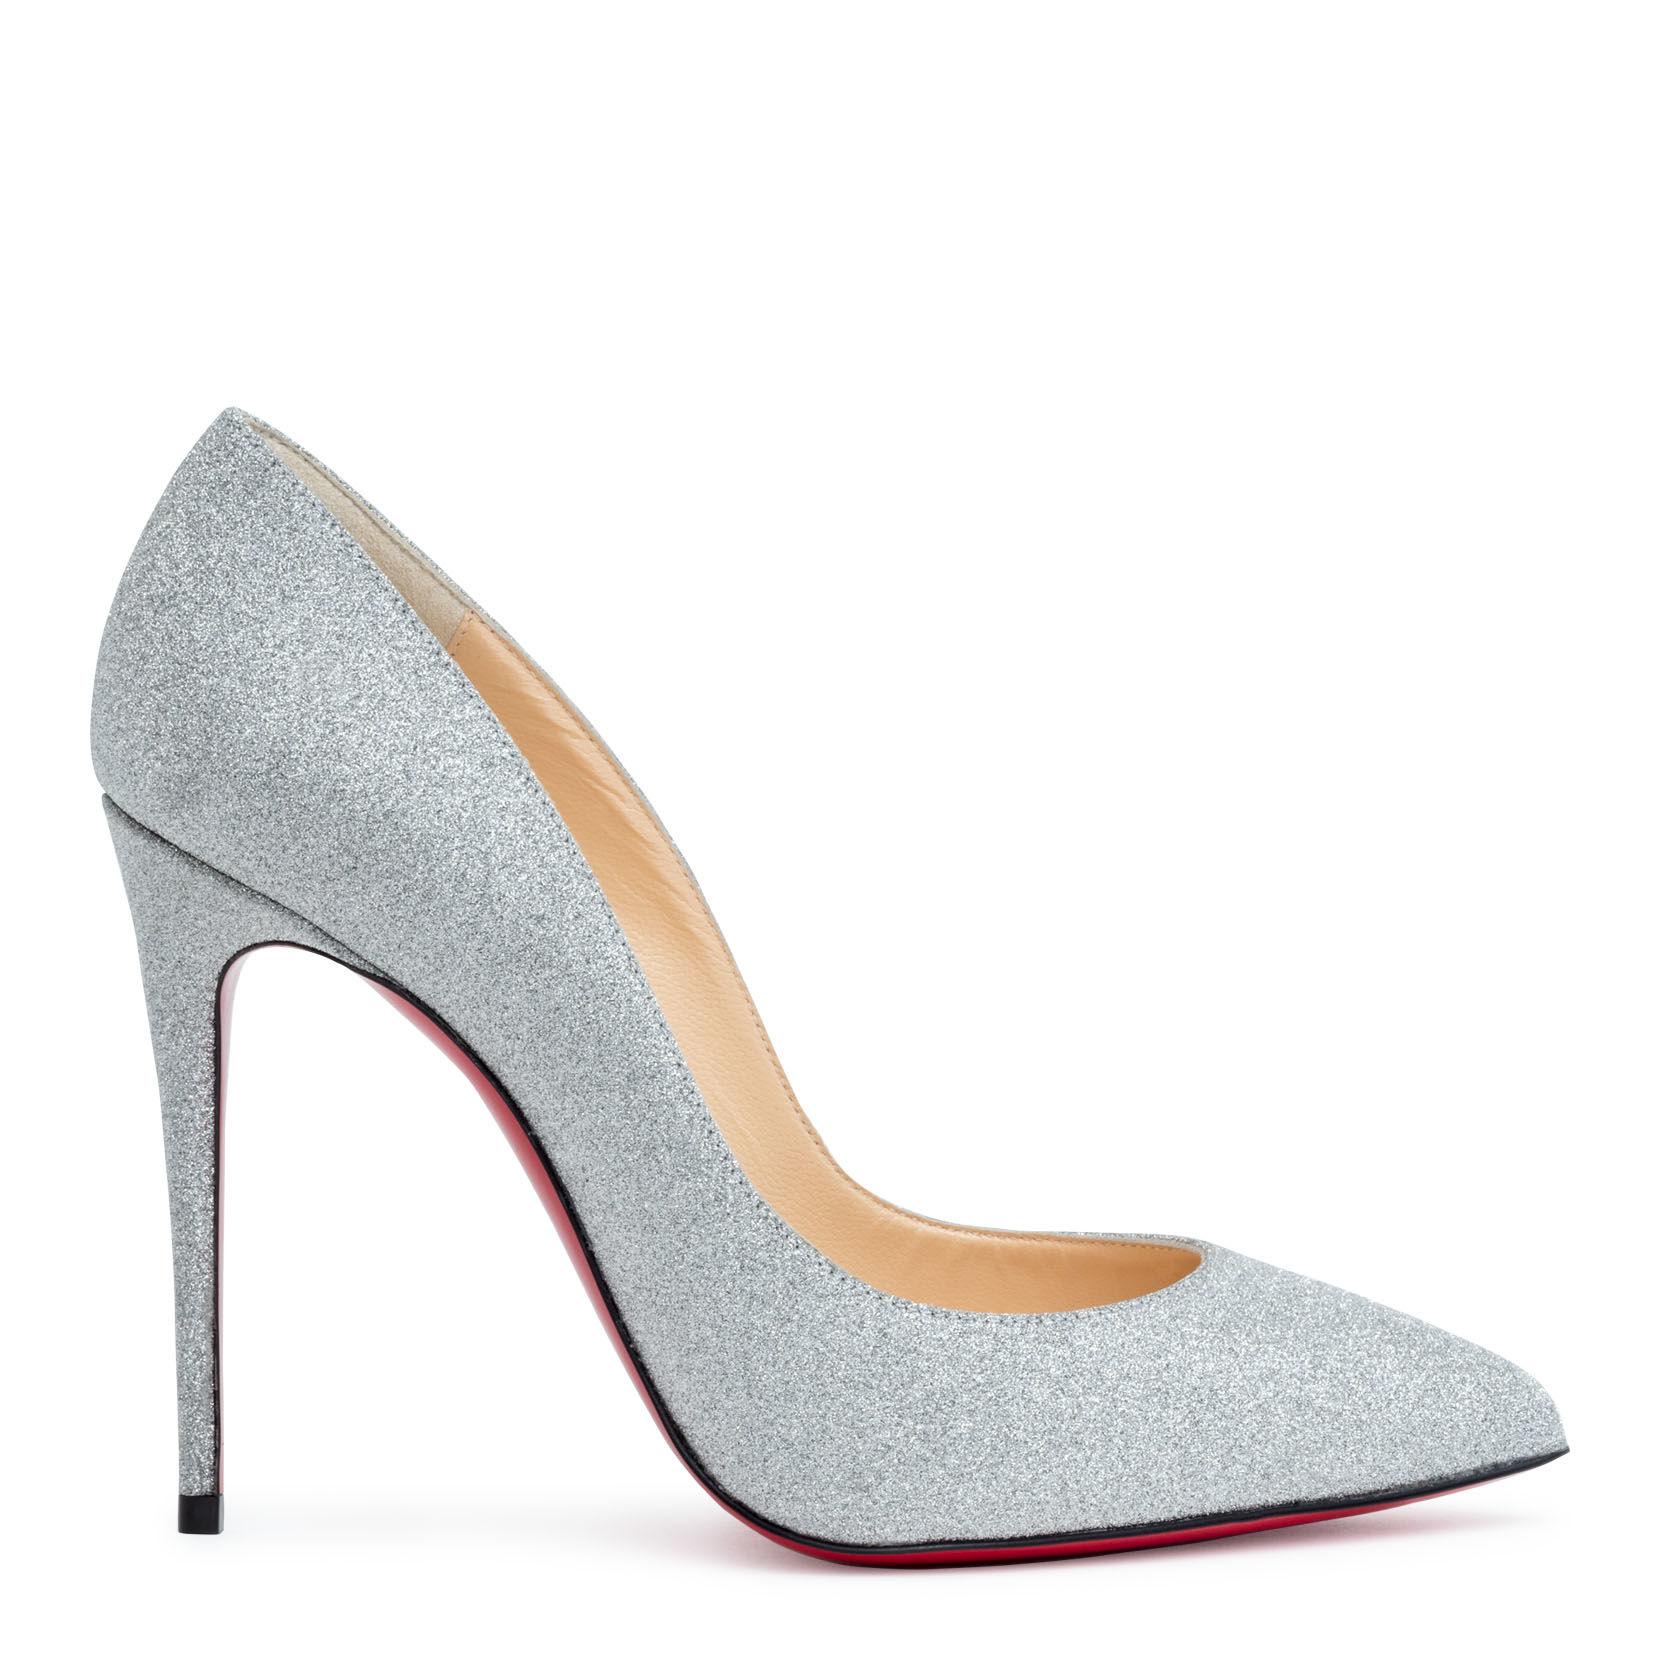 Christian Louboutin Pigalle Silver Glitter Pumps in Metallic